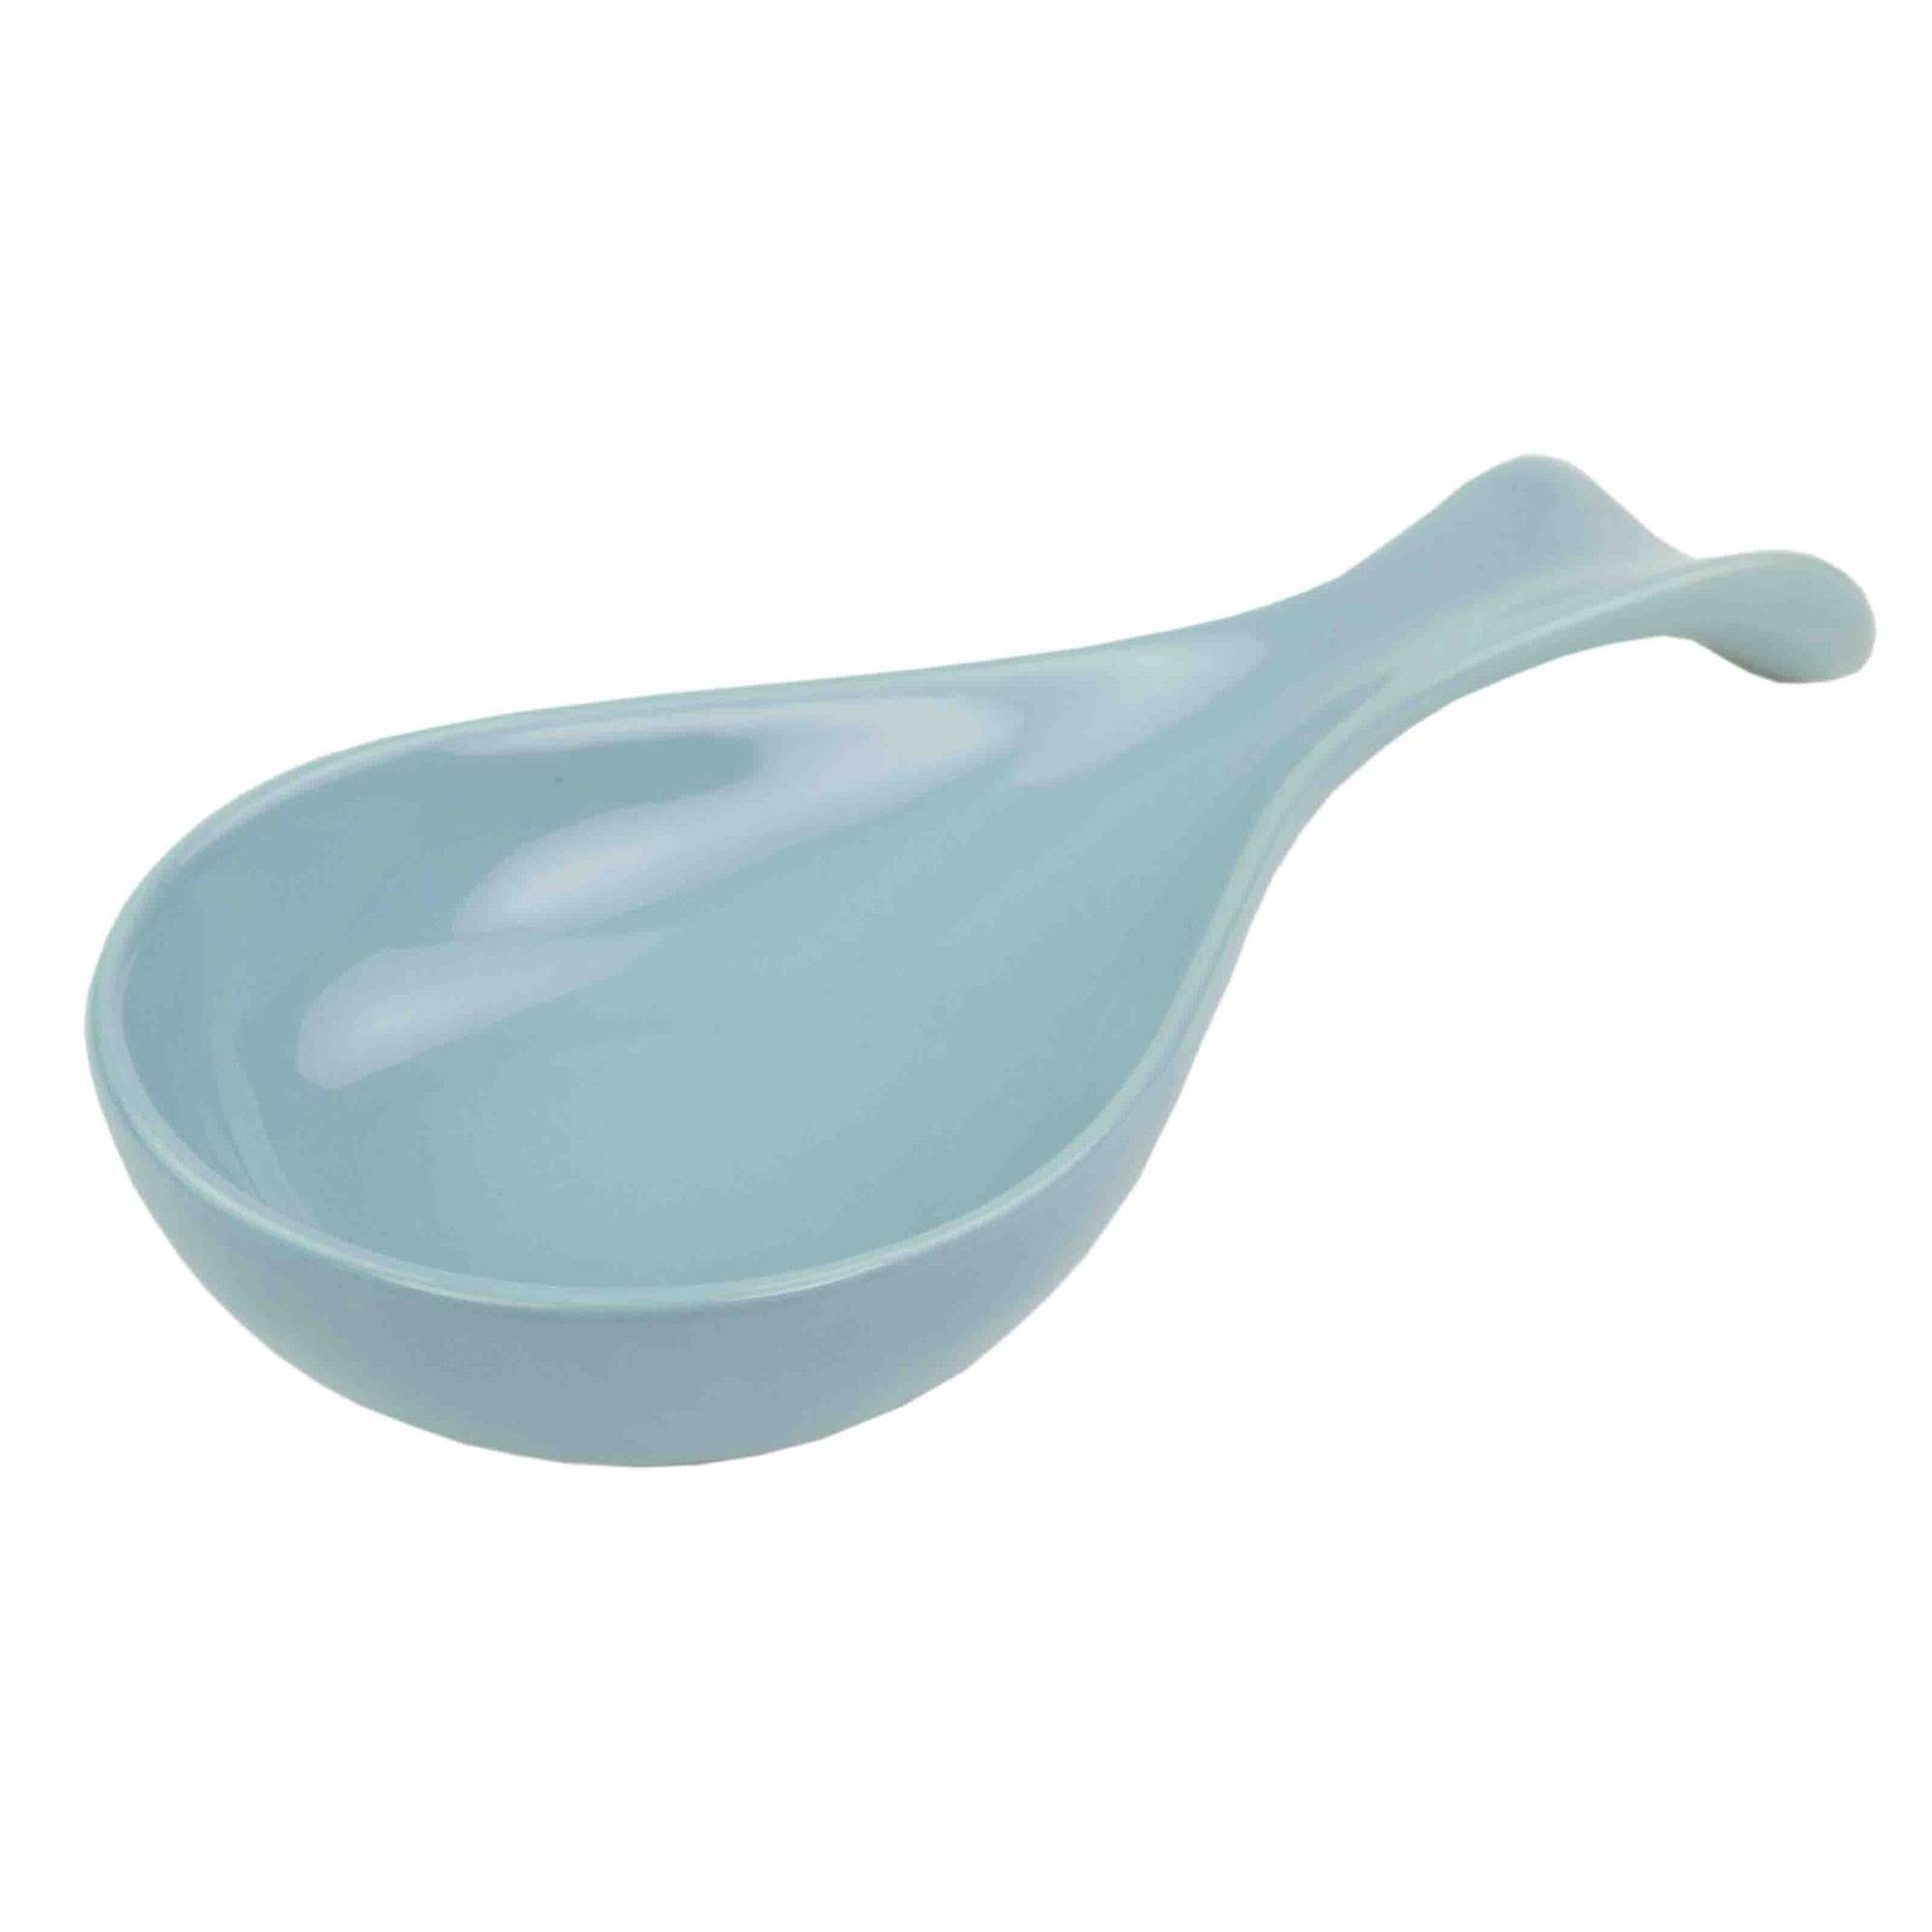 Turquoise Spoon Rest for Stove Top, DAYYET Ceramic Teal Large Spoon Holder,  Spoon Rest for Kitchen Counter, Spatula Holder Utensil Rest for Ladles